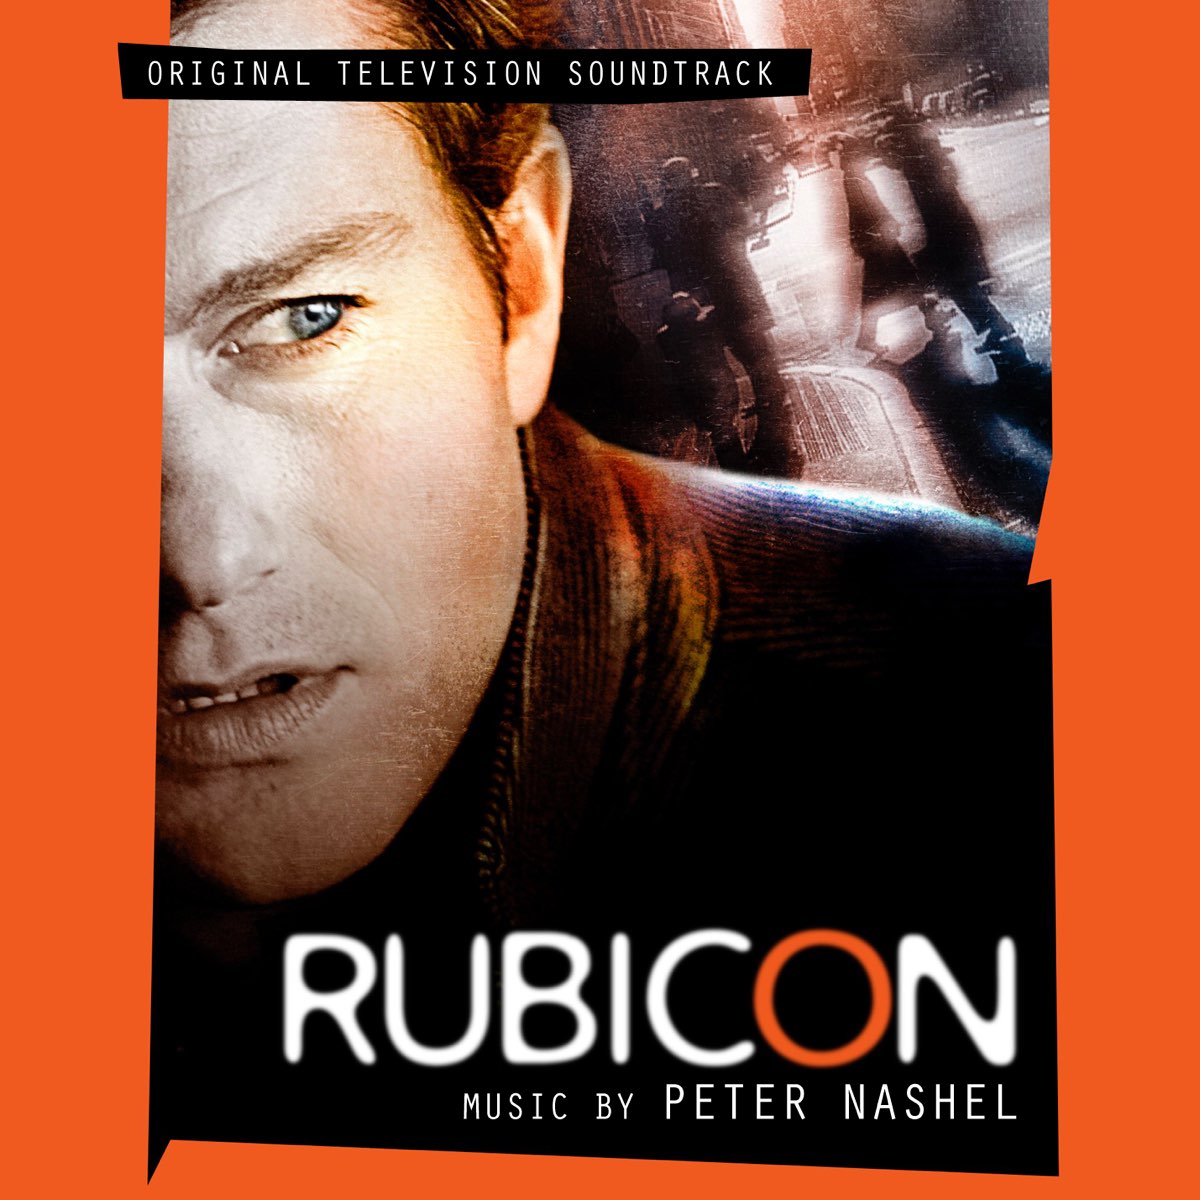 Soundtrack tv tv. Rubicon 2010 Series poster. Обложка диска House of thumbs - Crossing the Rubicon (2010). OST Rubicon.